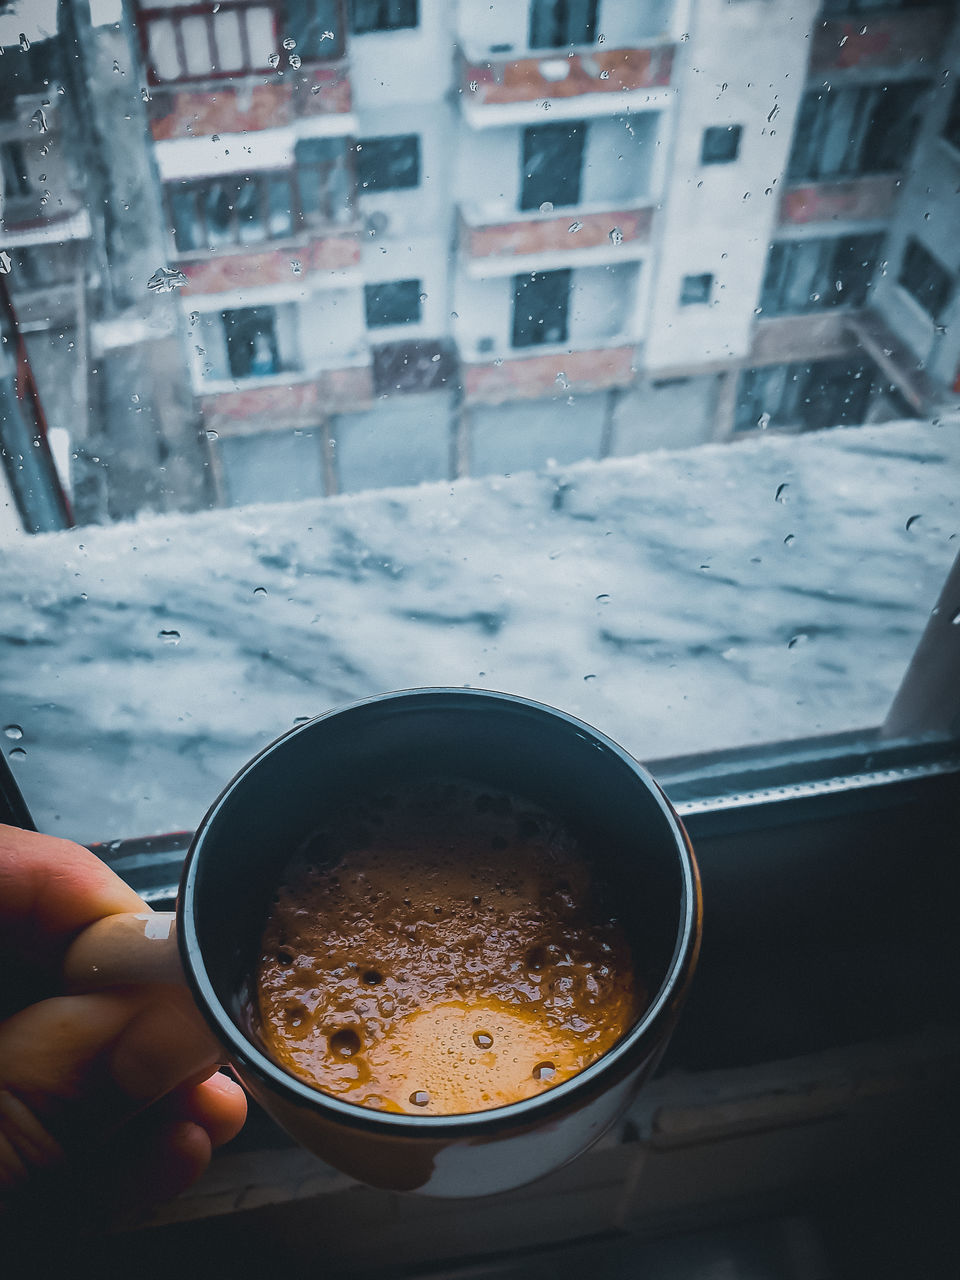 Person holding coffee cup in winter